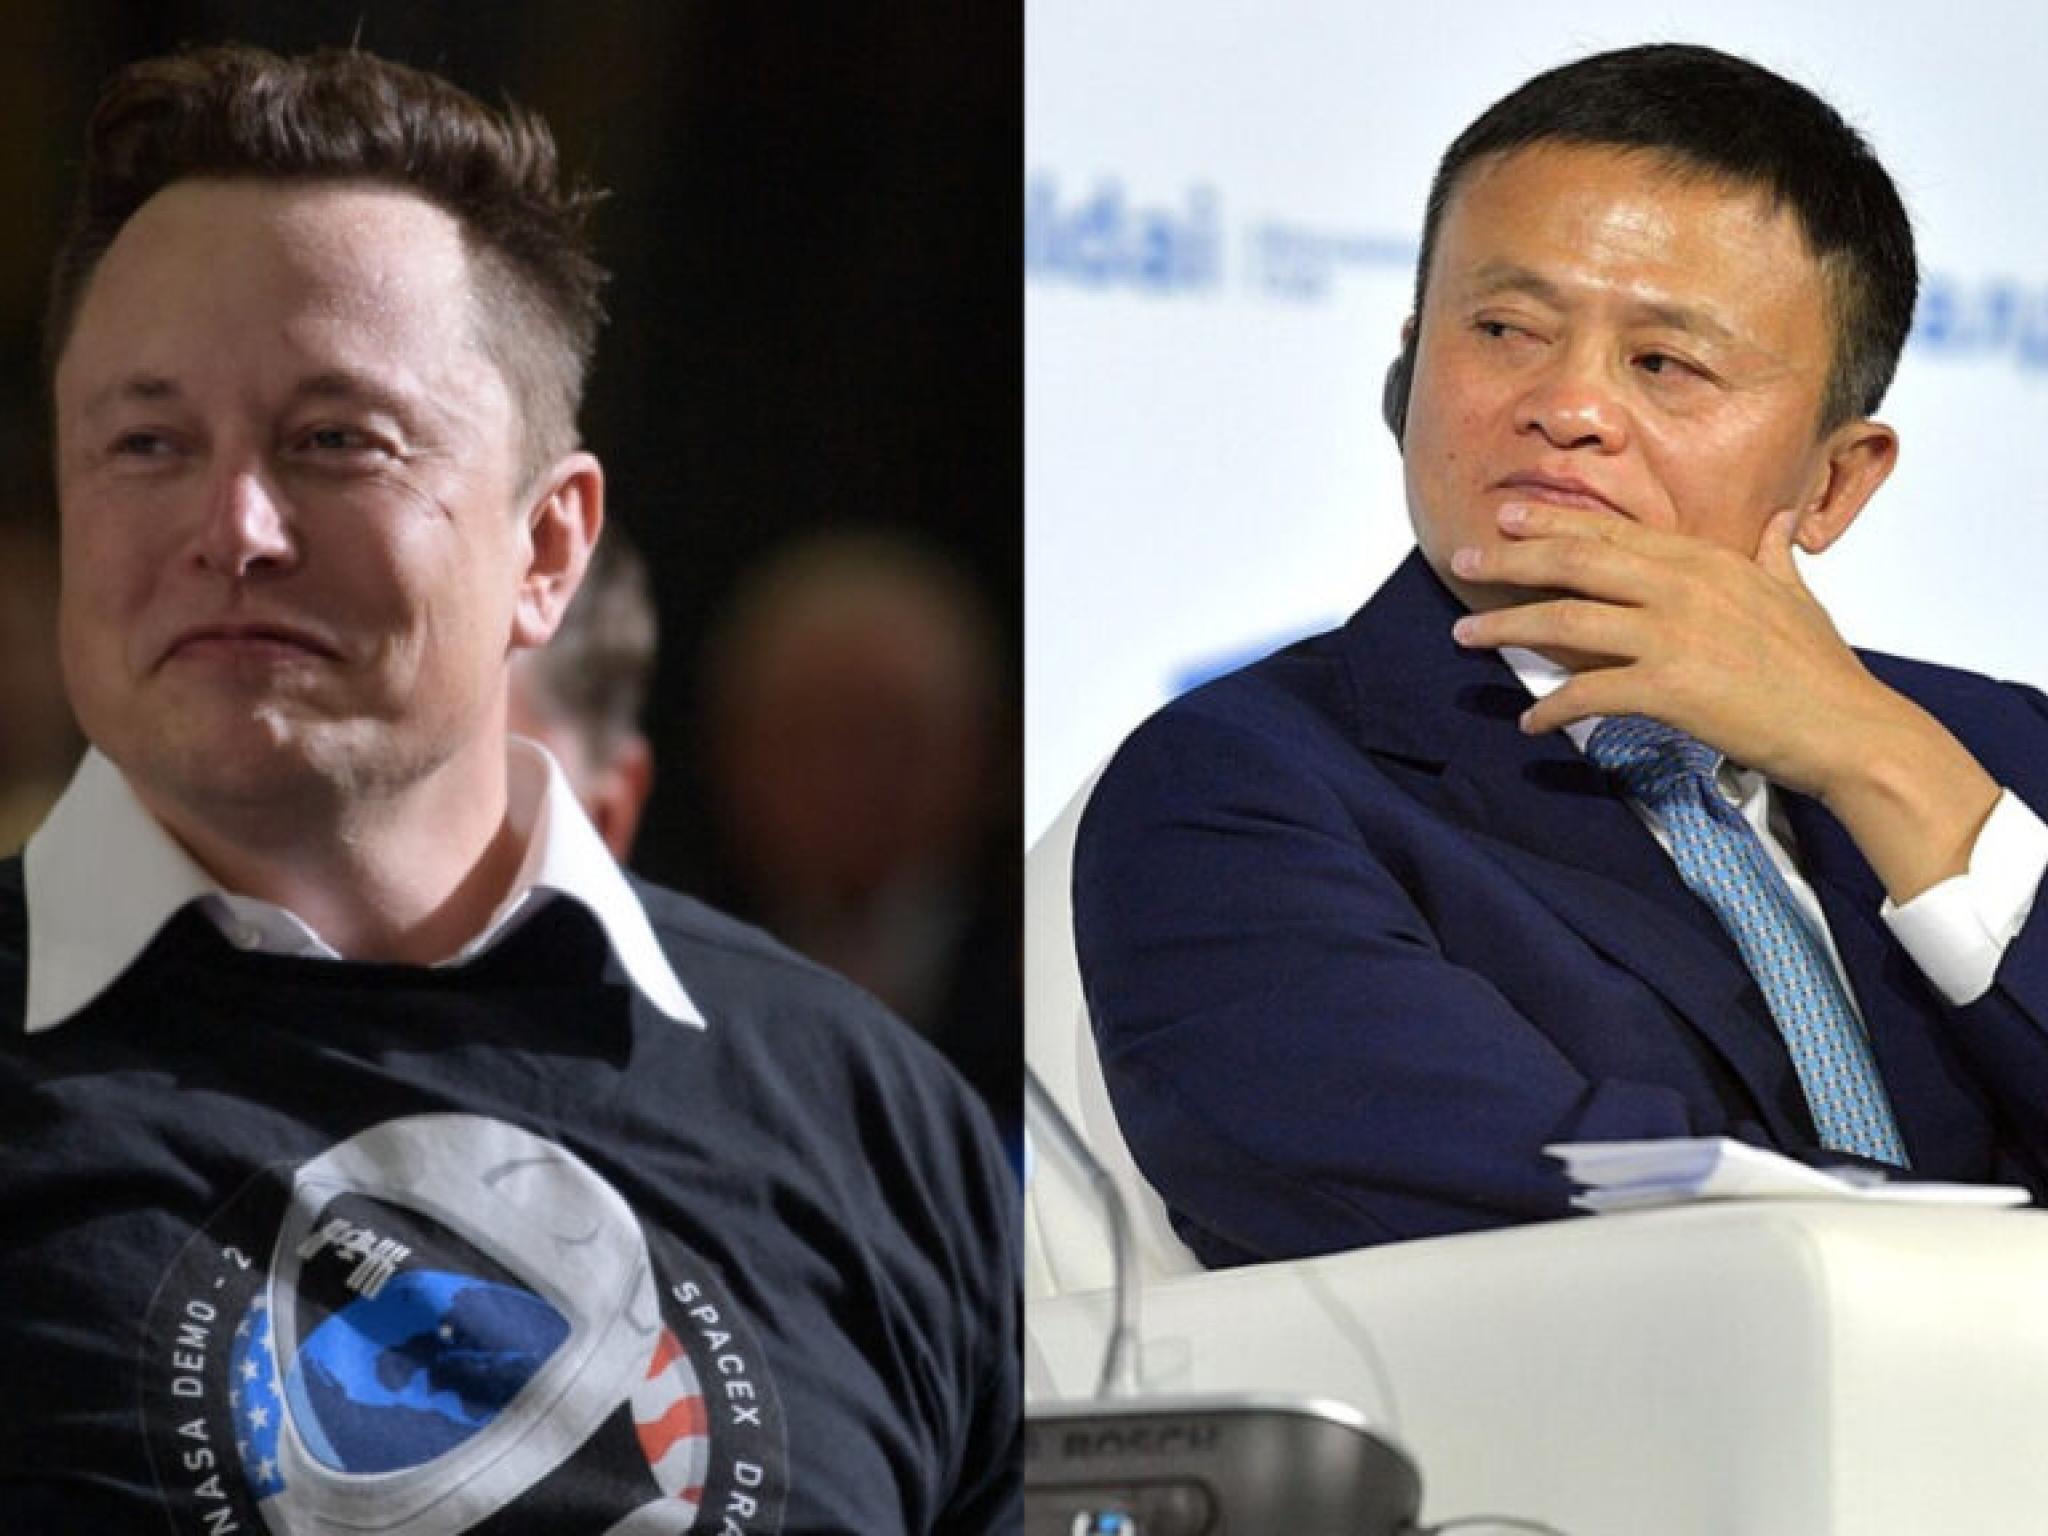  before-apple-intelligence-jack-ma-came-up-with-alibaba-intelligence-but-was-mocked-by-elon-musk 